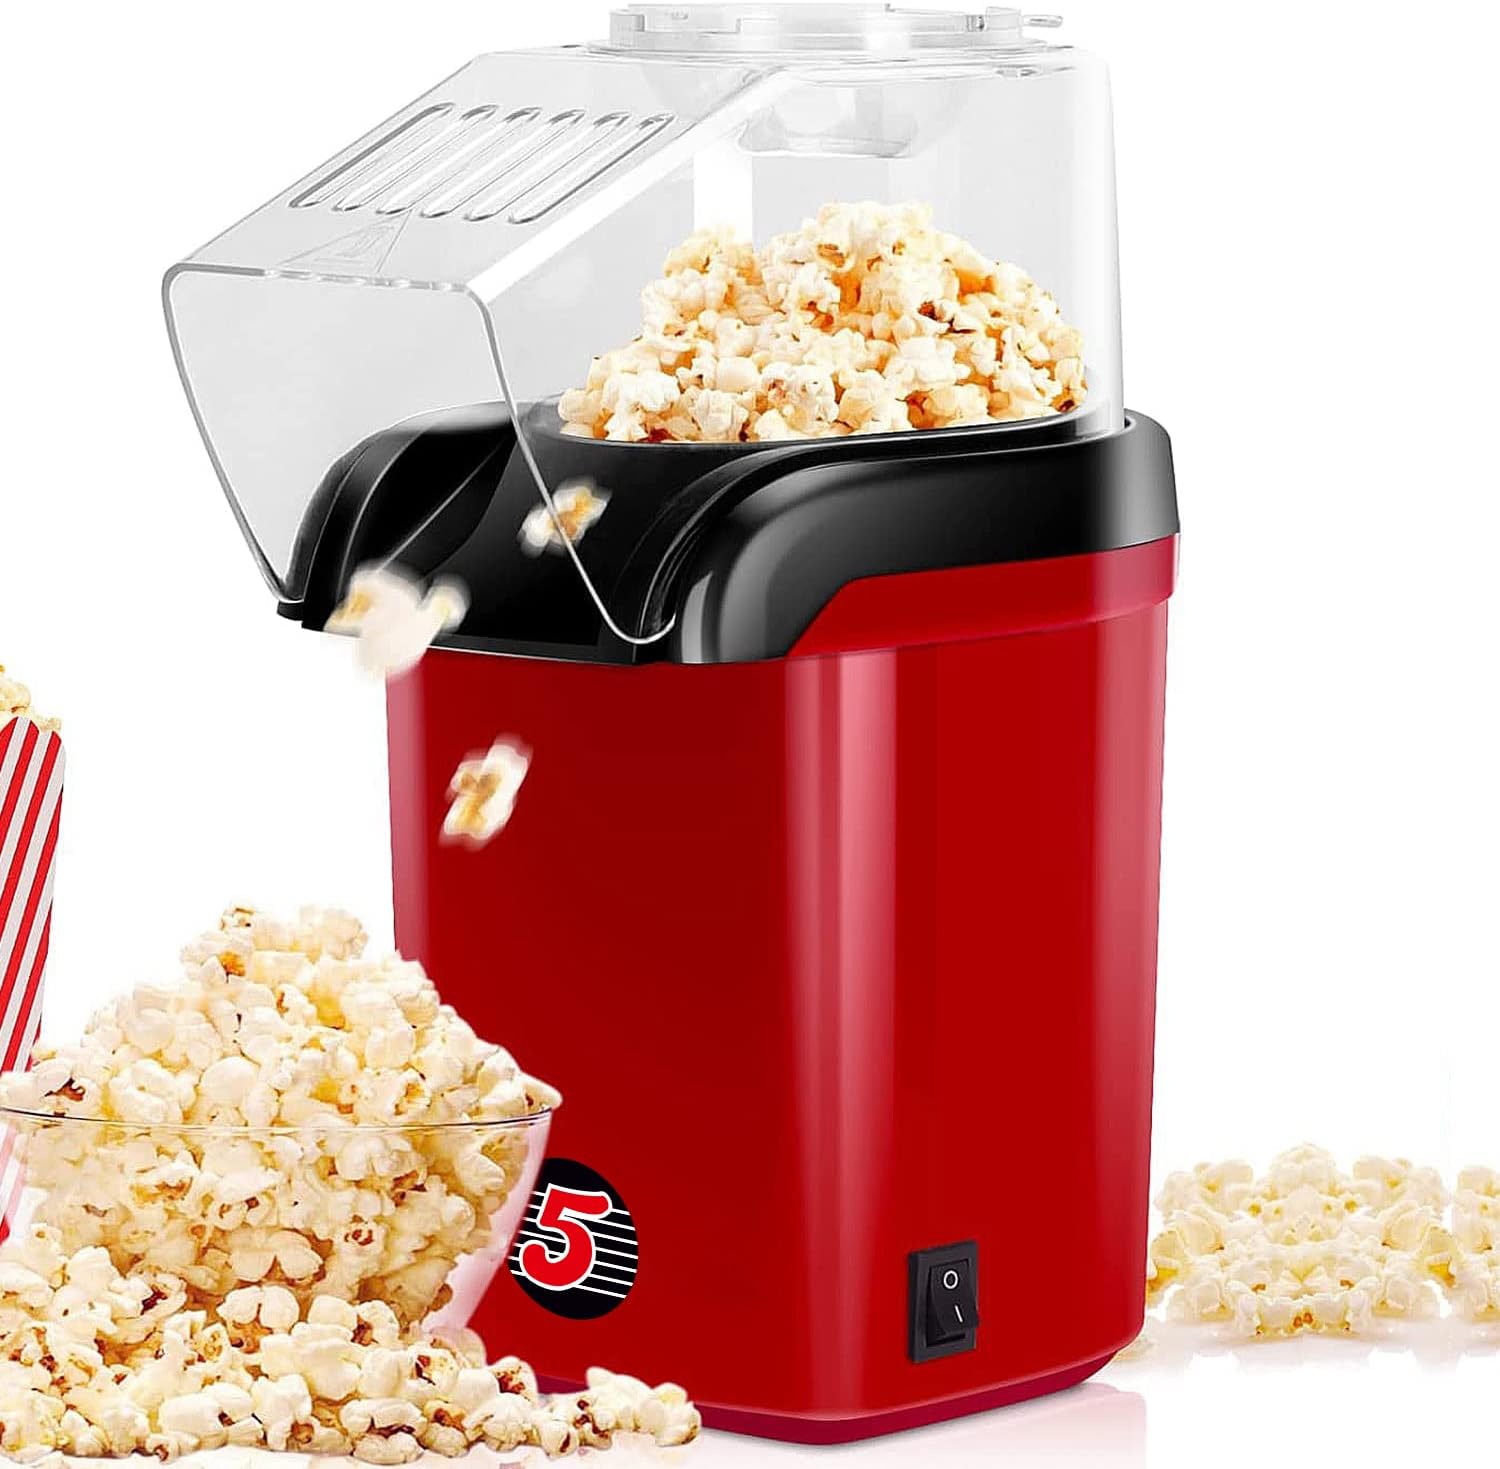 5Core Hot Air Popcorn Machine, 16 Cup, Electric Oil-Free Pop Corn Kernel Popper BPA-Free Food Safe Red